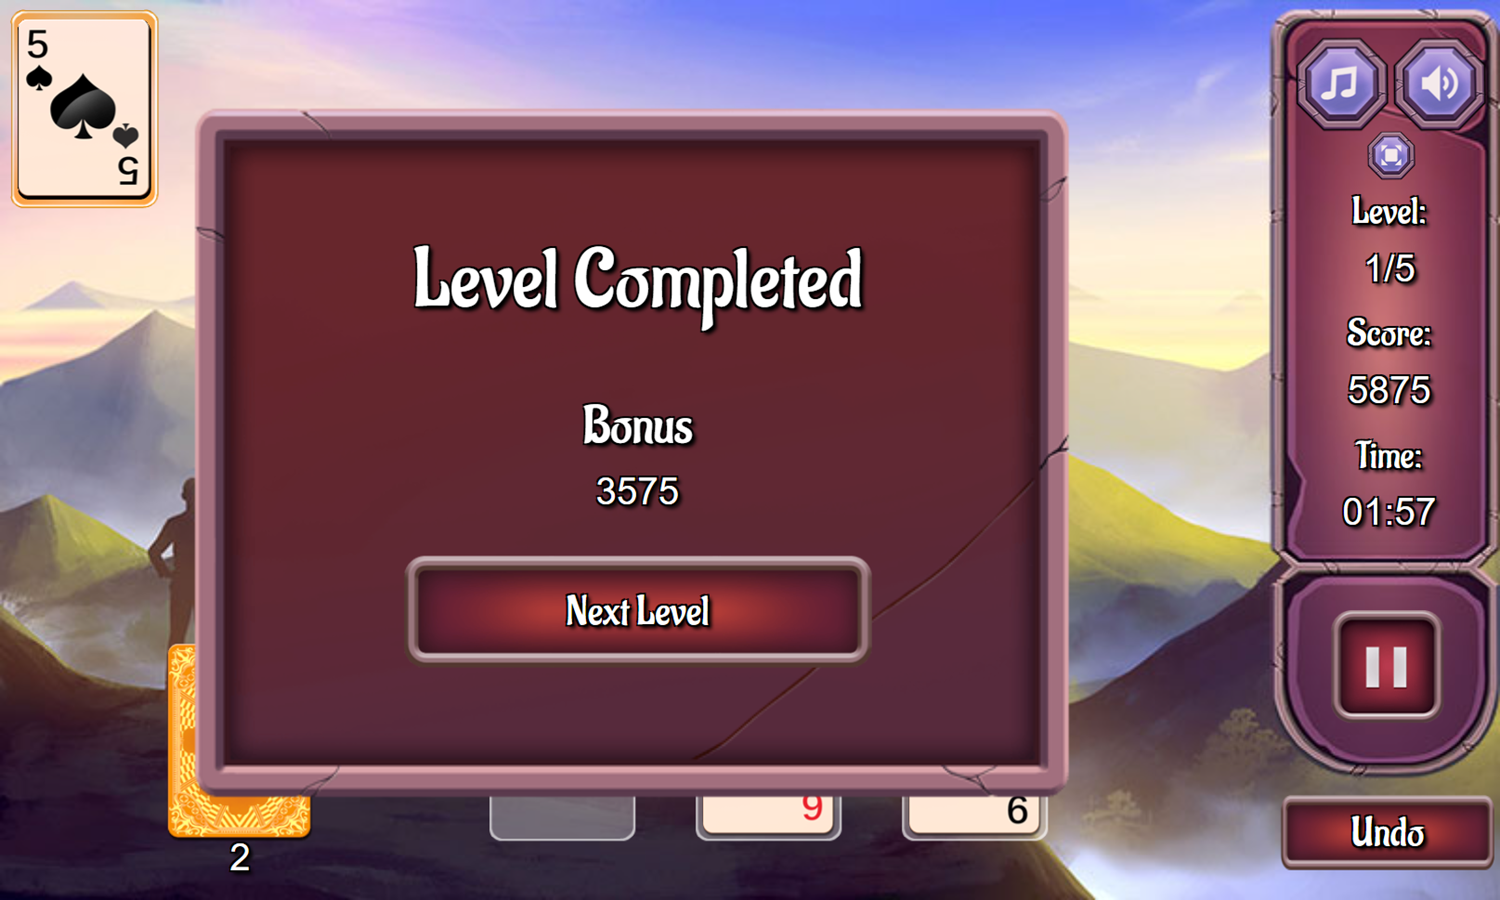 Pyramid Mountains Solitaire Game Level Completed Screenshot.